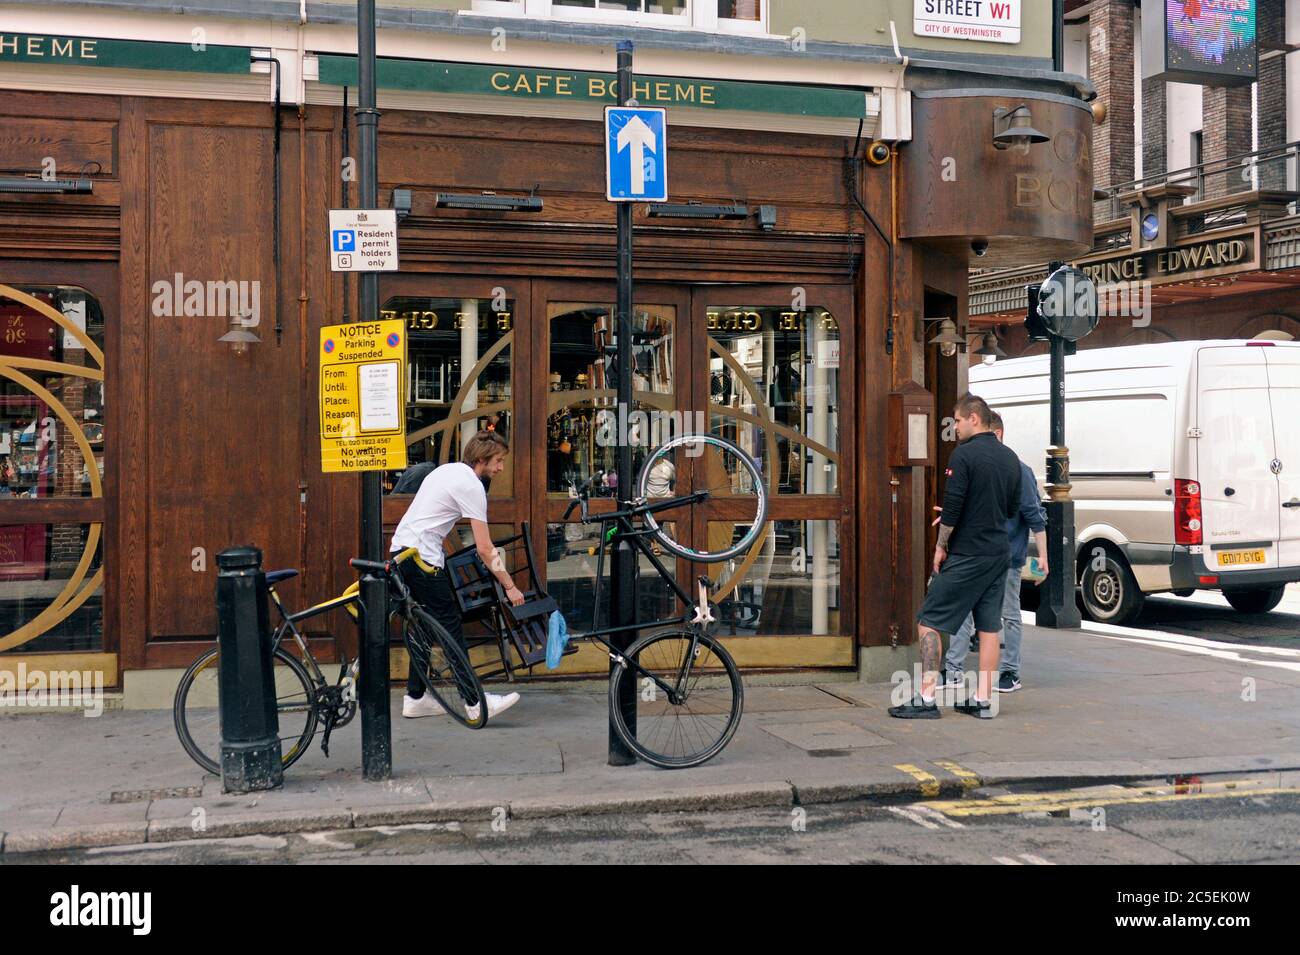 London, UK, 2 July 2020 Cafe Boheme in Old Compton Street prepares to reopen. West End prepares for Super Saturday as pubs open. Many businesses show no sign of opening as the hotel and theatres remain closed and there are no tourists. Credit: JOHNNY ARMSTEAD/Alamy Live News Stock Photo